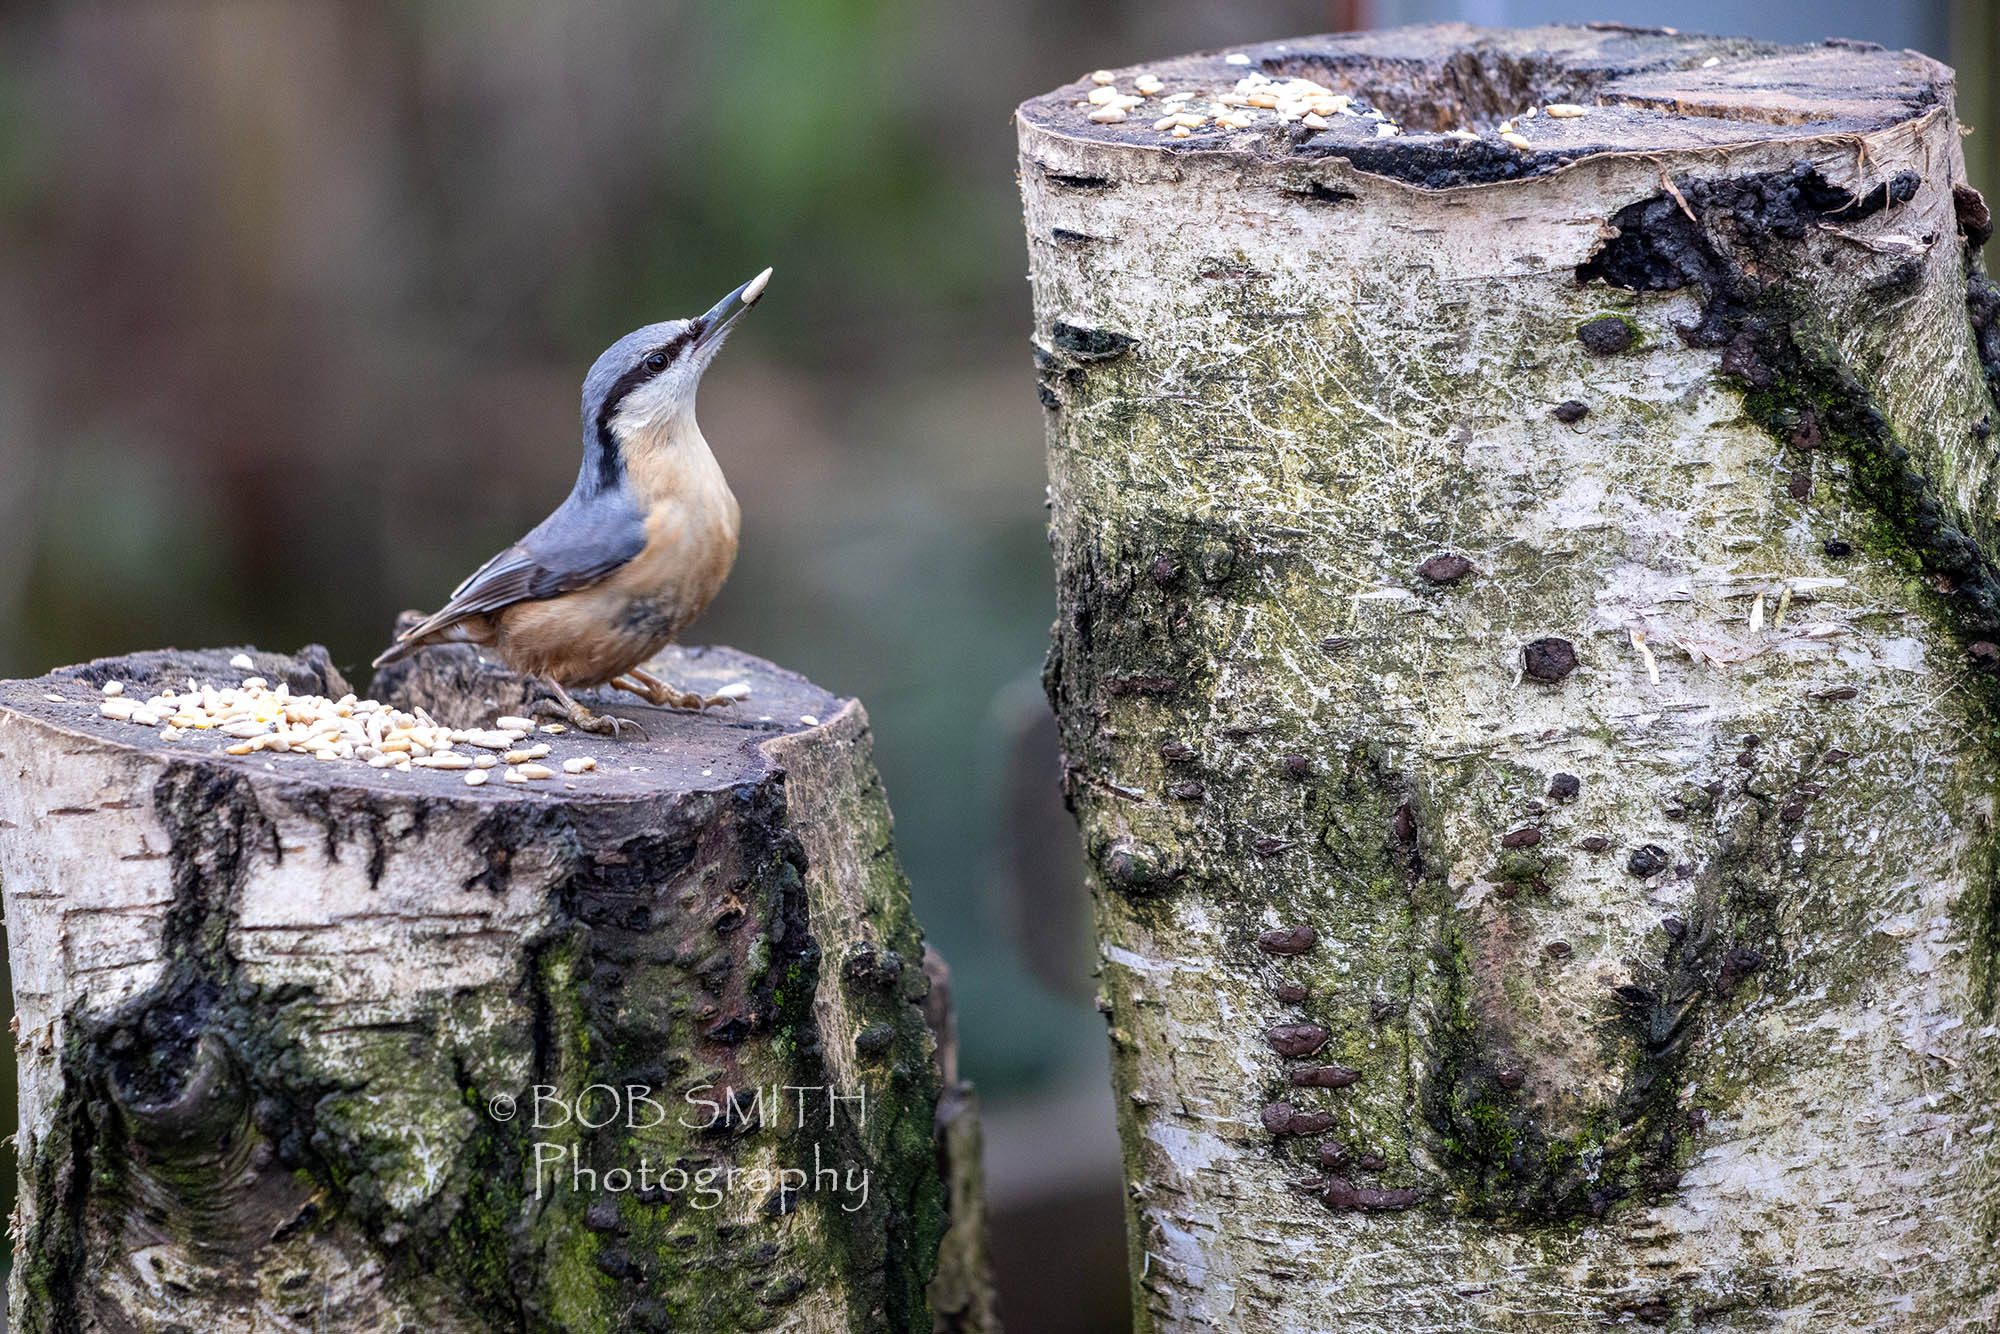 A nuthatch at Middleton Lakes nature reserve, Staffordshire